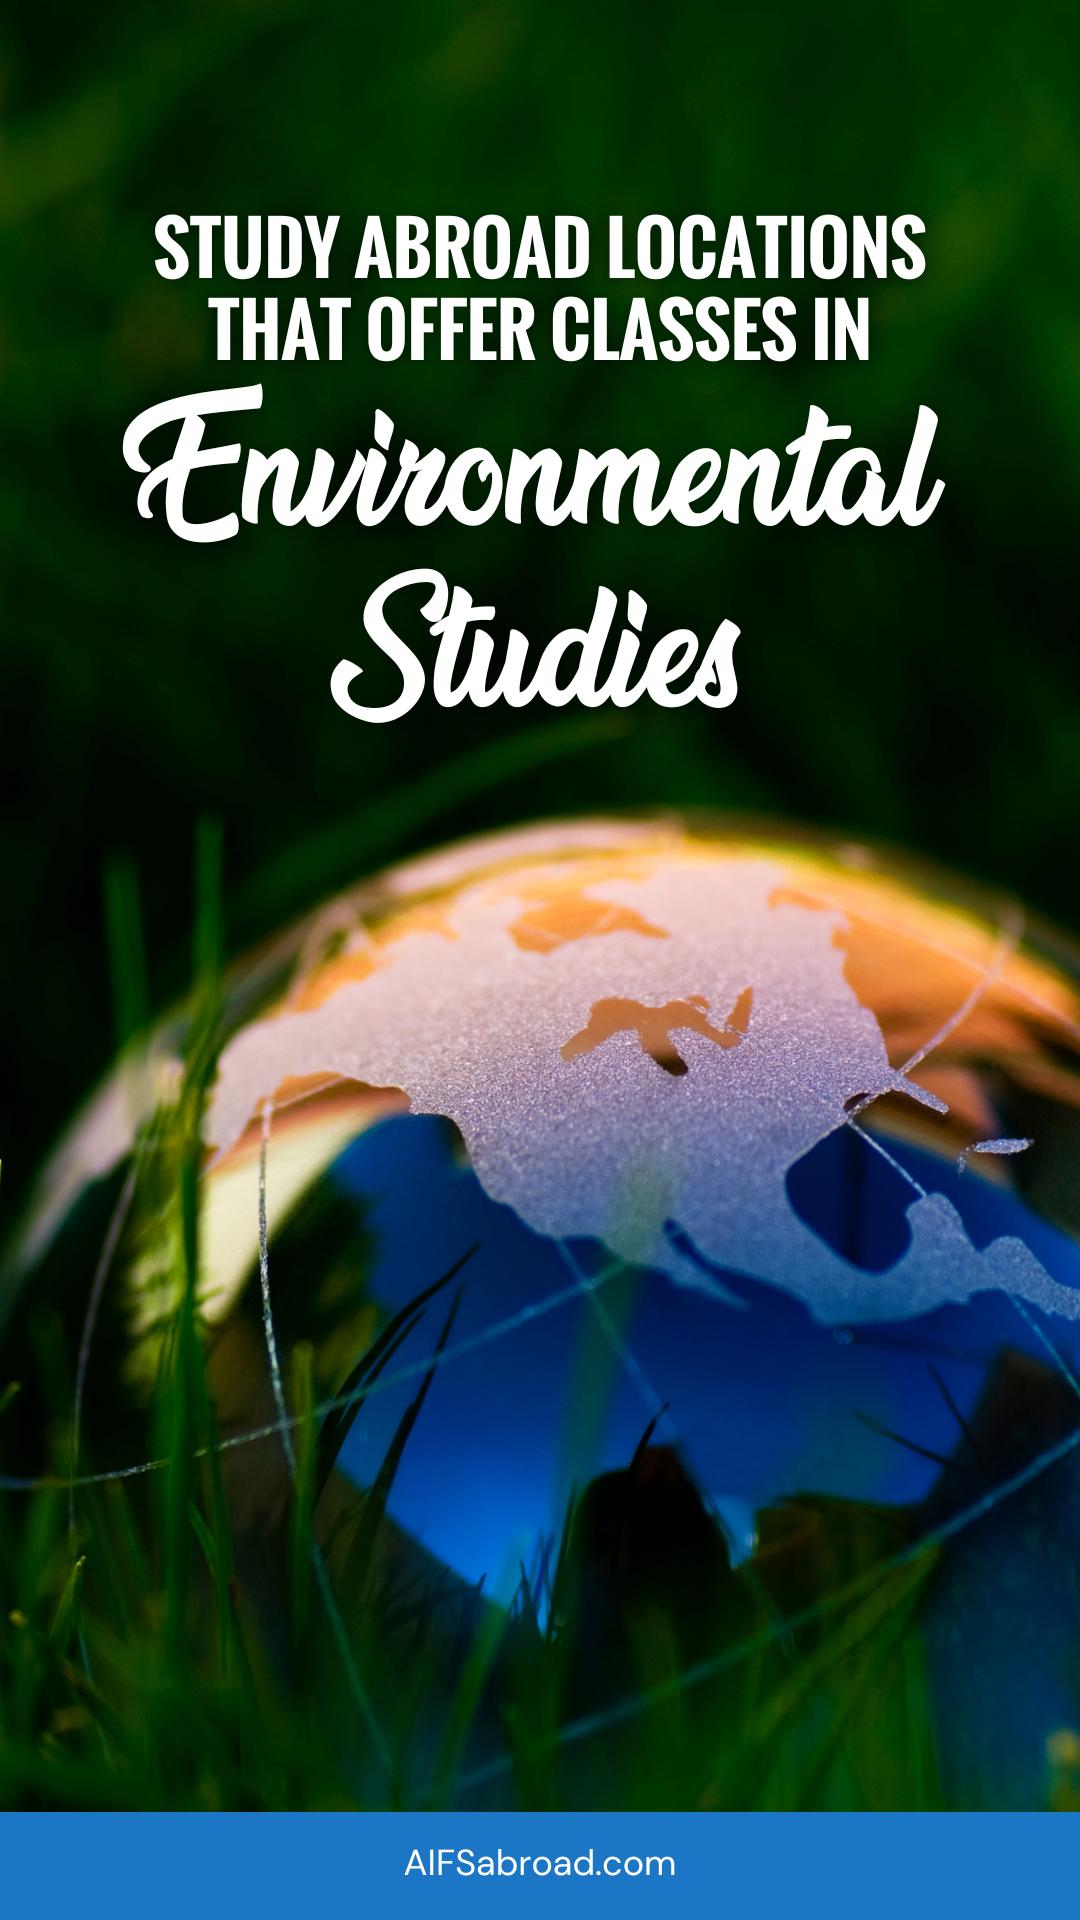 Pin Image - Earth in green grass with text "Study Abroad Program Locations that Offer Environmental Studies Classes - AIFS Abroad"